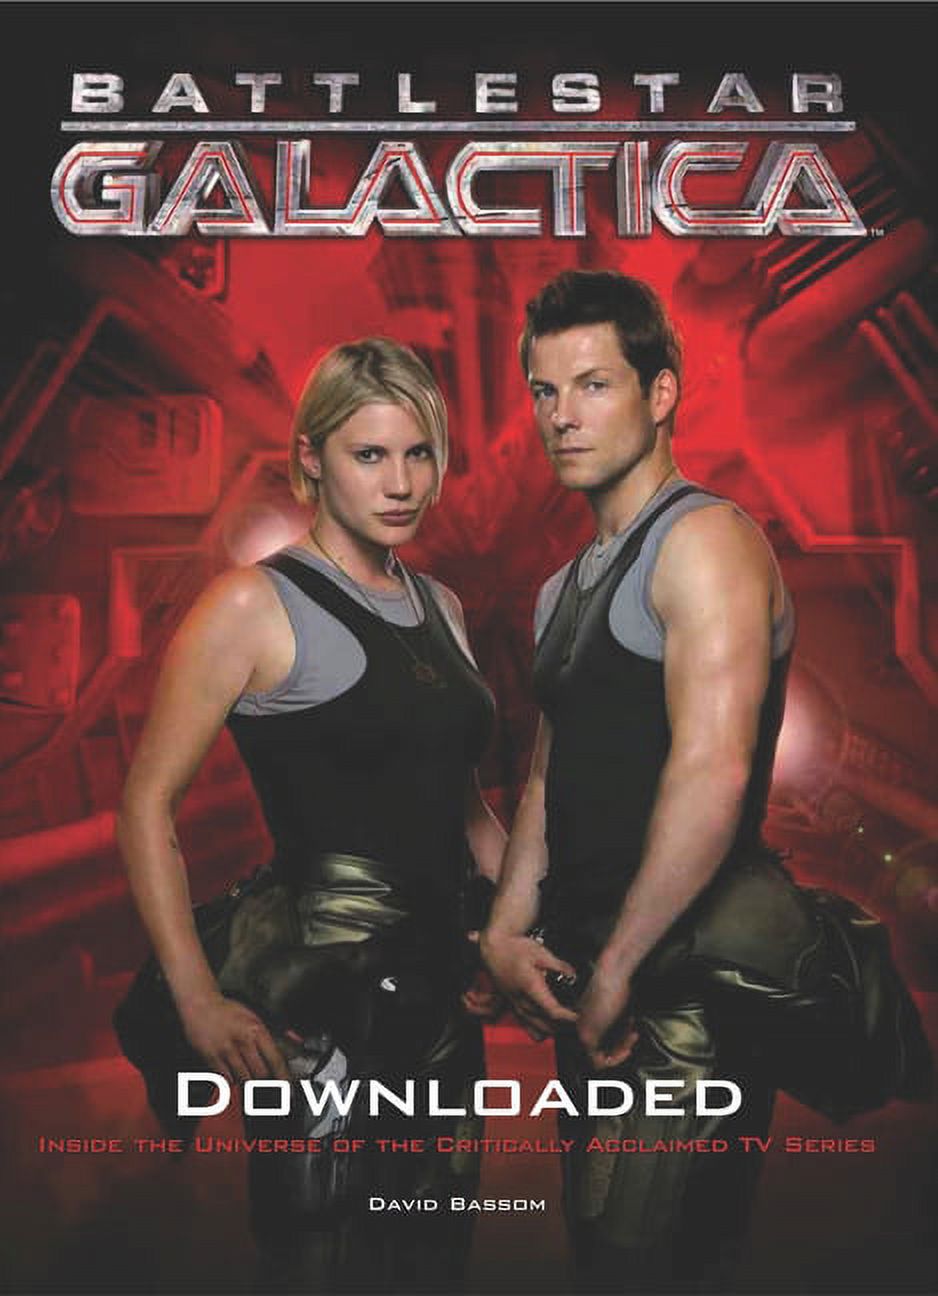 Battlestar Galactica: Downloaded : Inside the Universe of the critically acclaimed TV series (Paperback) - image 1 of 1